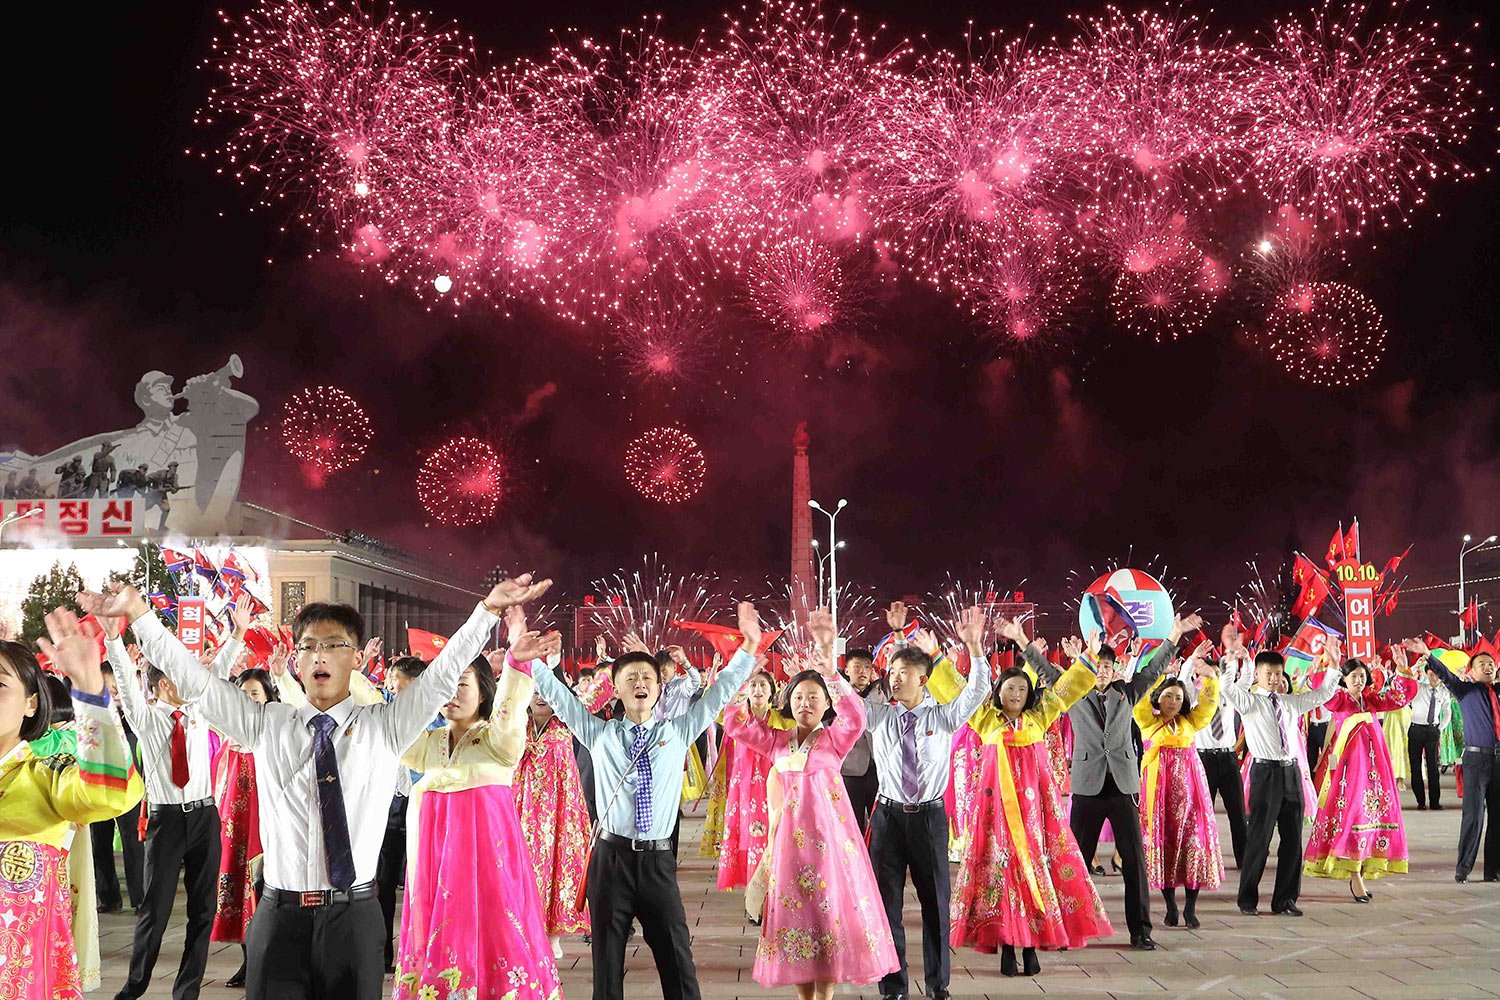  Youth and students attend an evening gala with a firework display to celebrate the 77th anniversary of the founding of the Workers' Party of Korea at the Kim Il Sung Square in Pyongyang, North Korea Monday, Oct. 10, 2022. (AP Photo/Jon Chol Jin) 